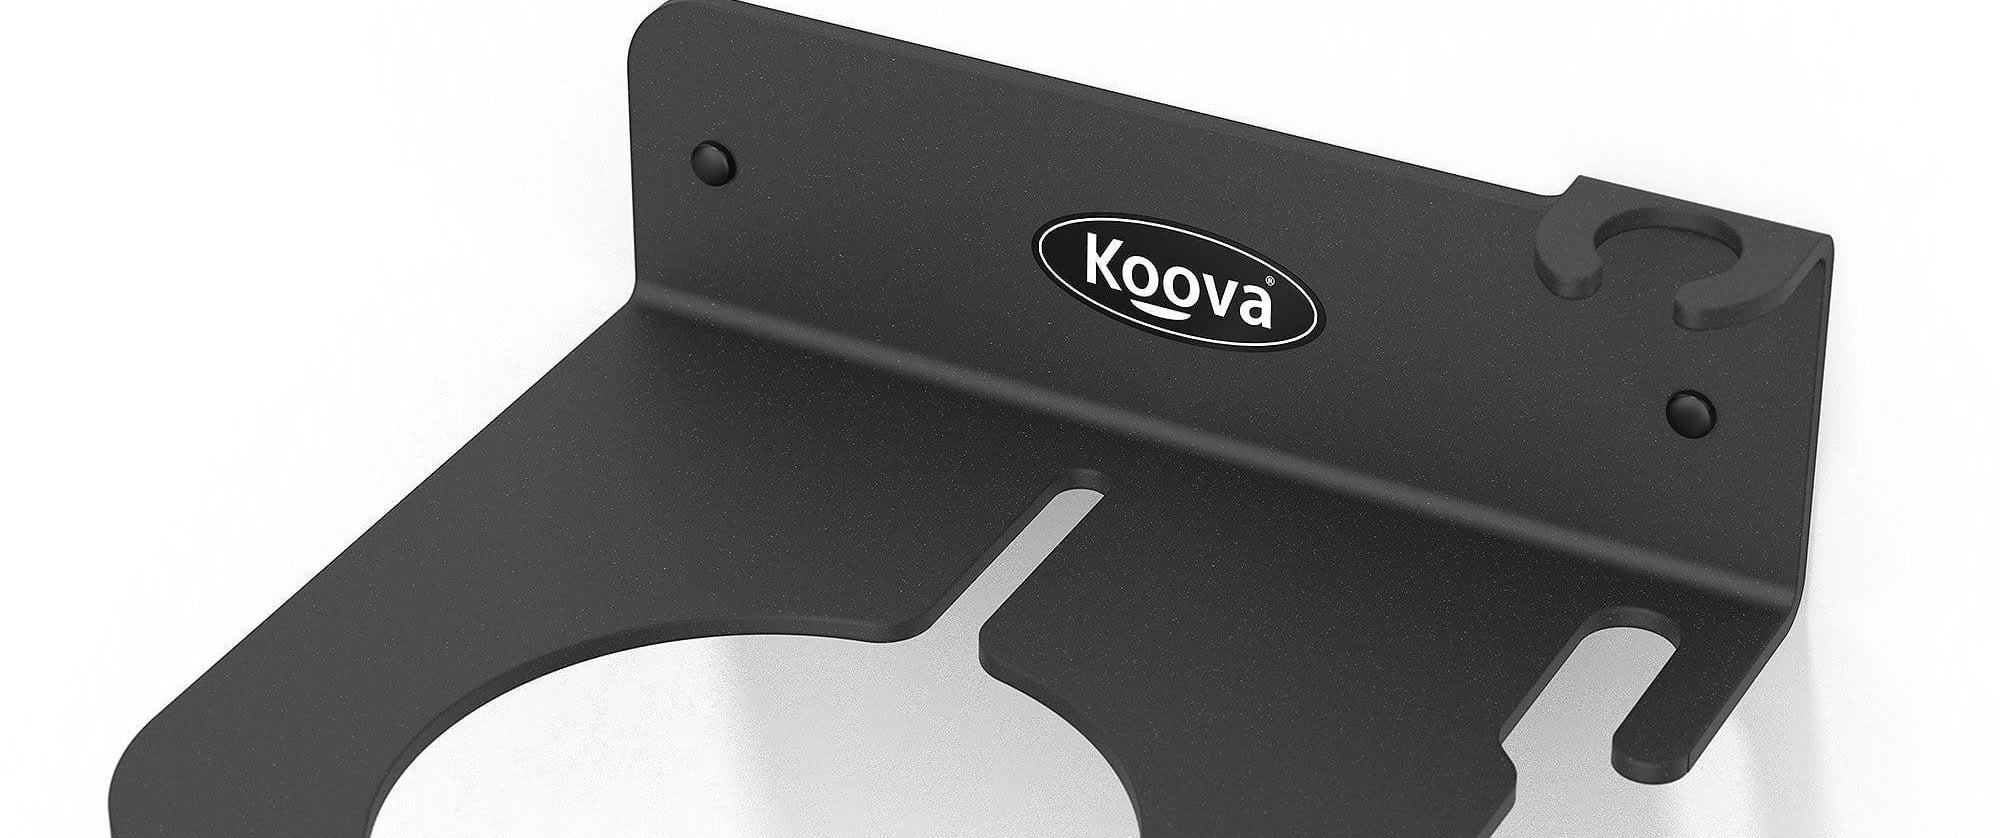 Koova wall mounted lawn and garden pressure sprayer mount holder for the garage or shed - Angle View